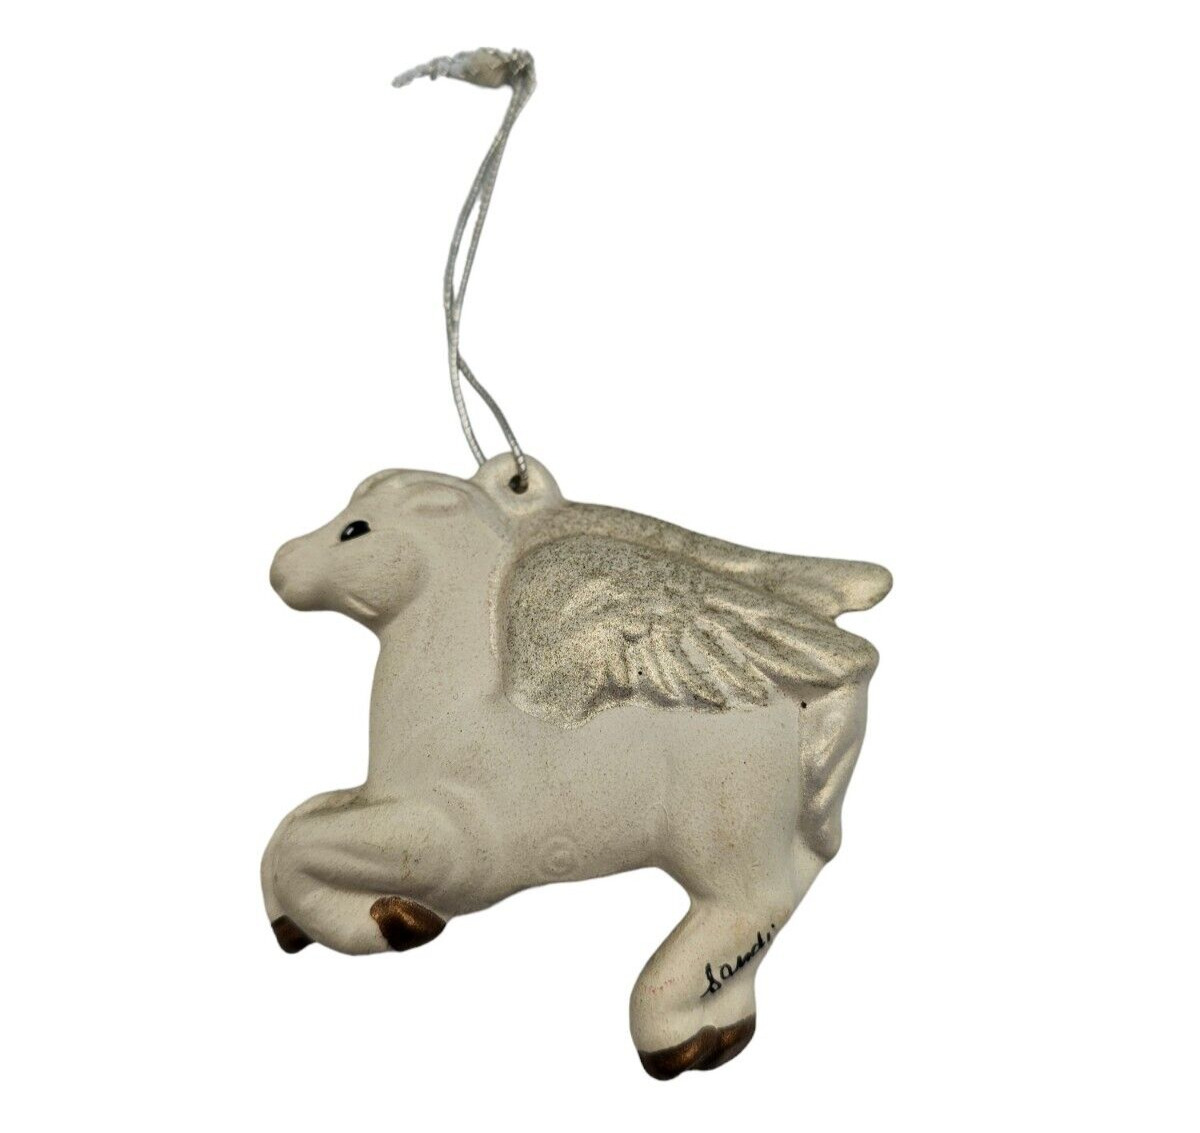 Vintage 1980s Hand Painted Unicorn Christmas Ornament Ceramic Ivory and Silver